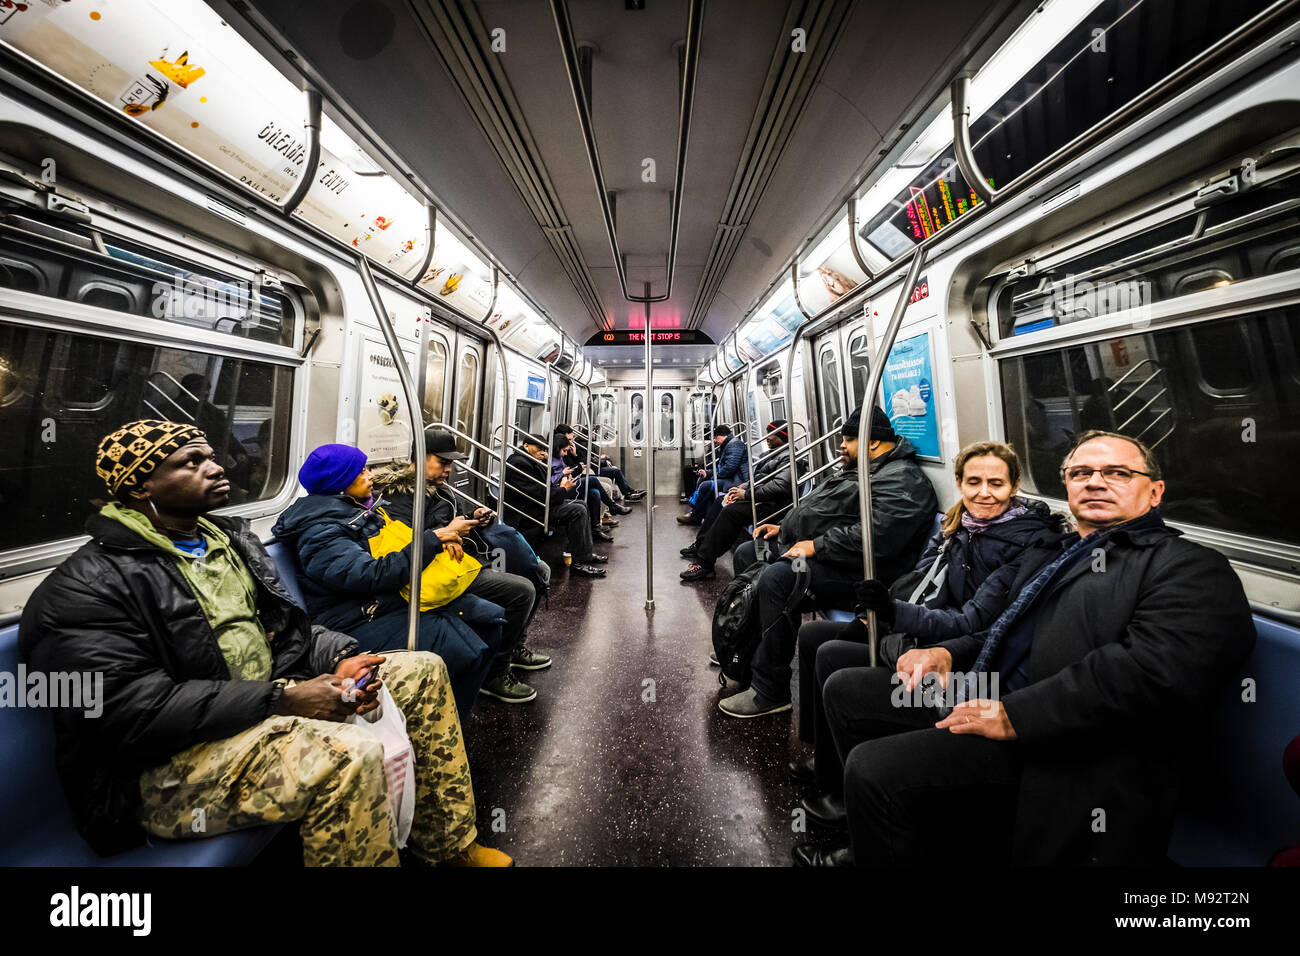 Commuters in subway wagon at New York subway system Stock Photo